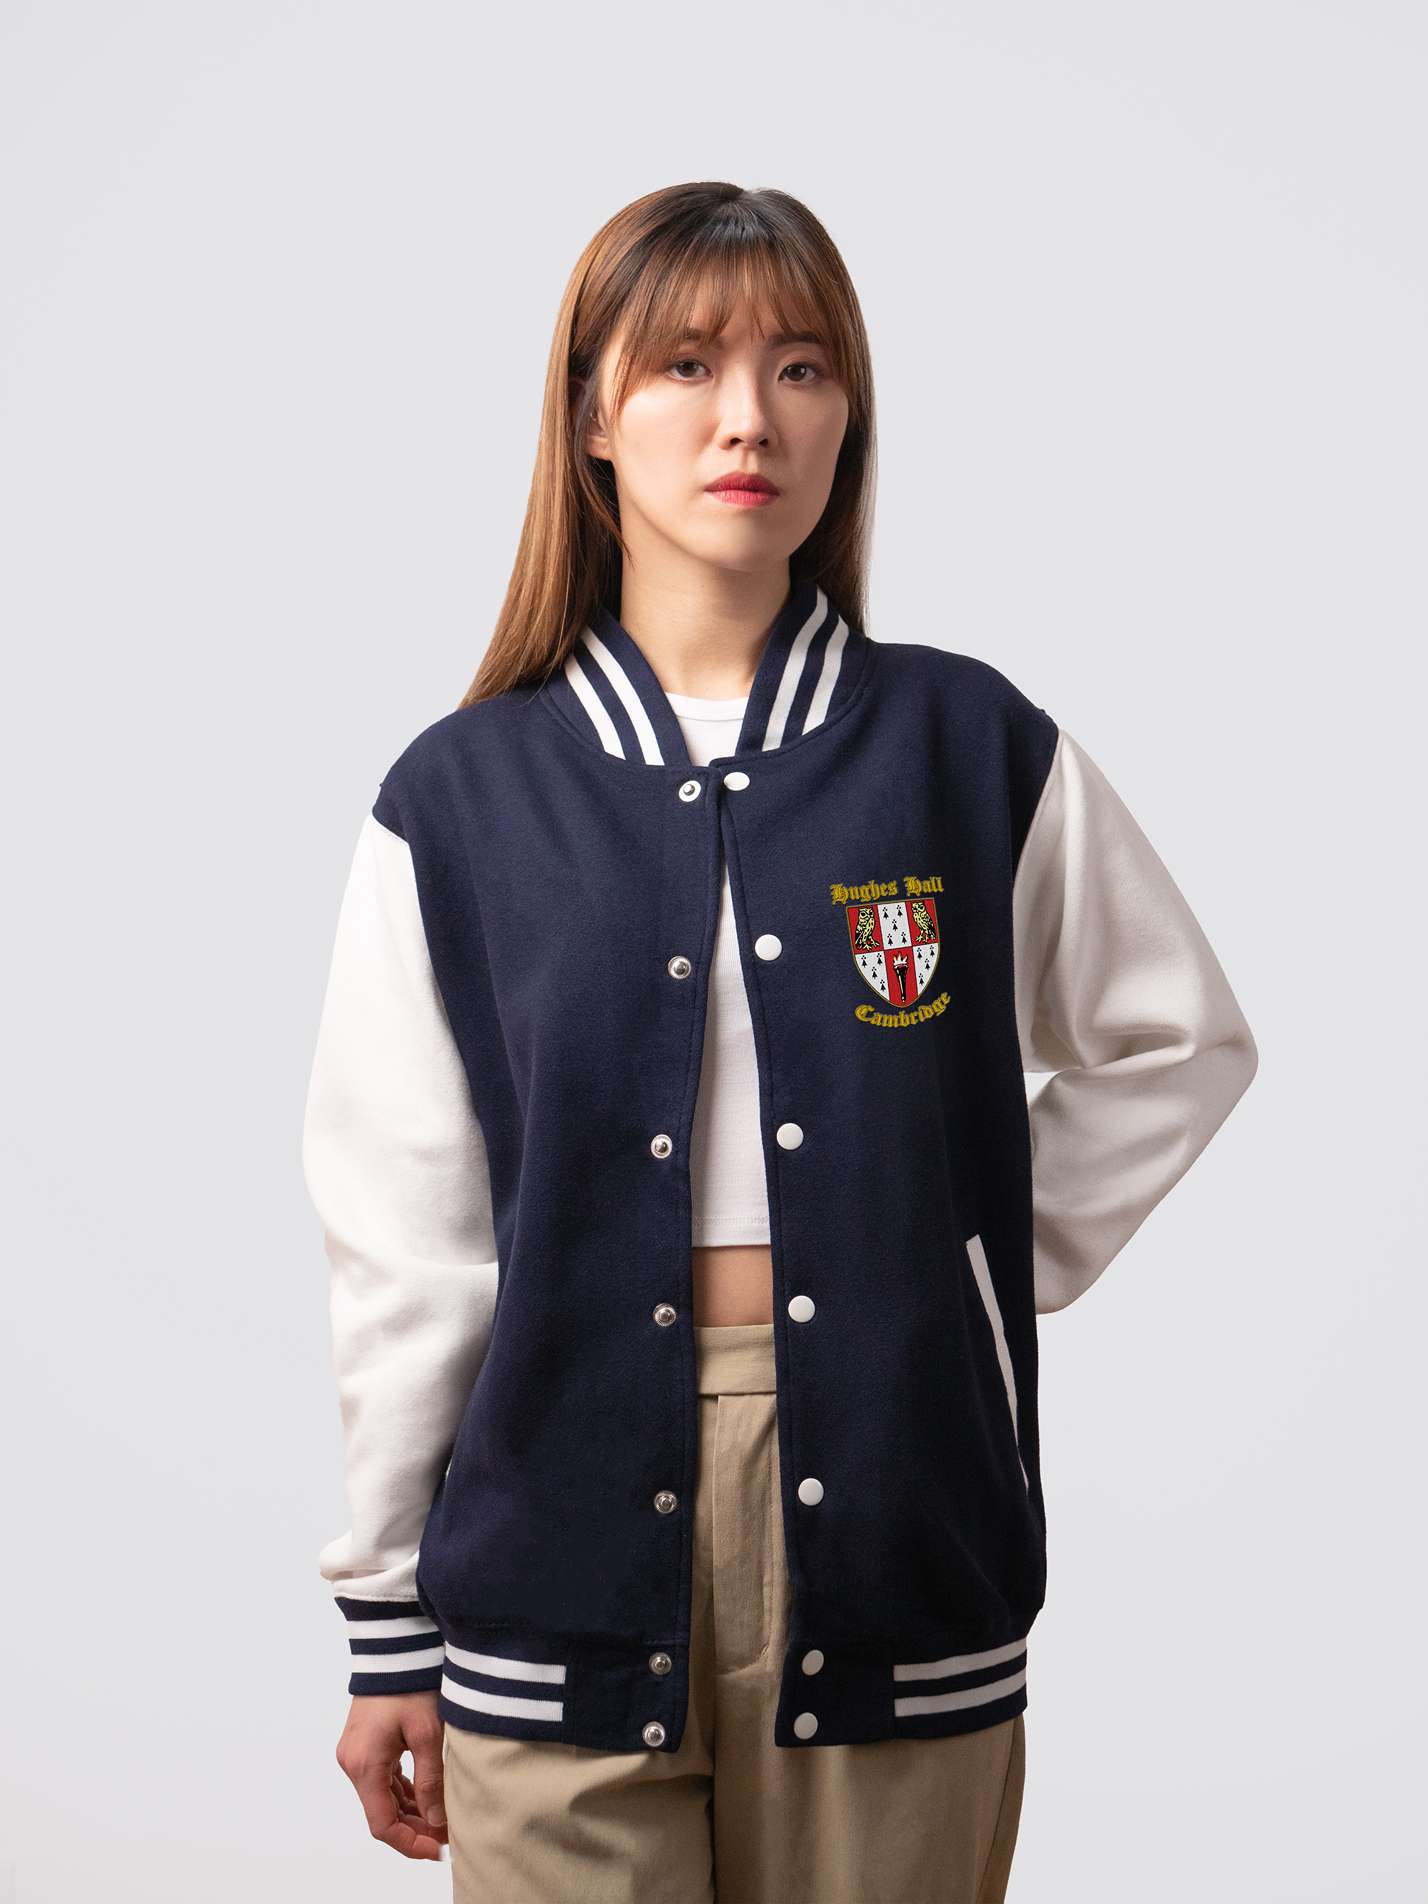 Retro style varsity jacket, with embroidered Hughes Hall crest